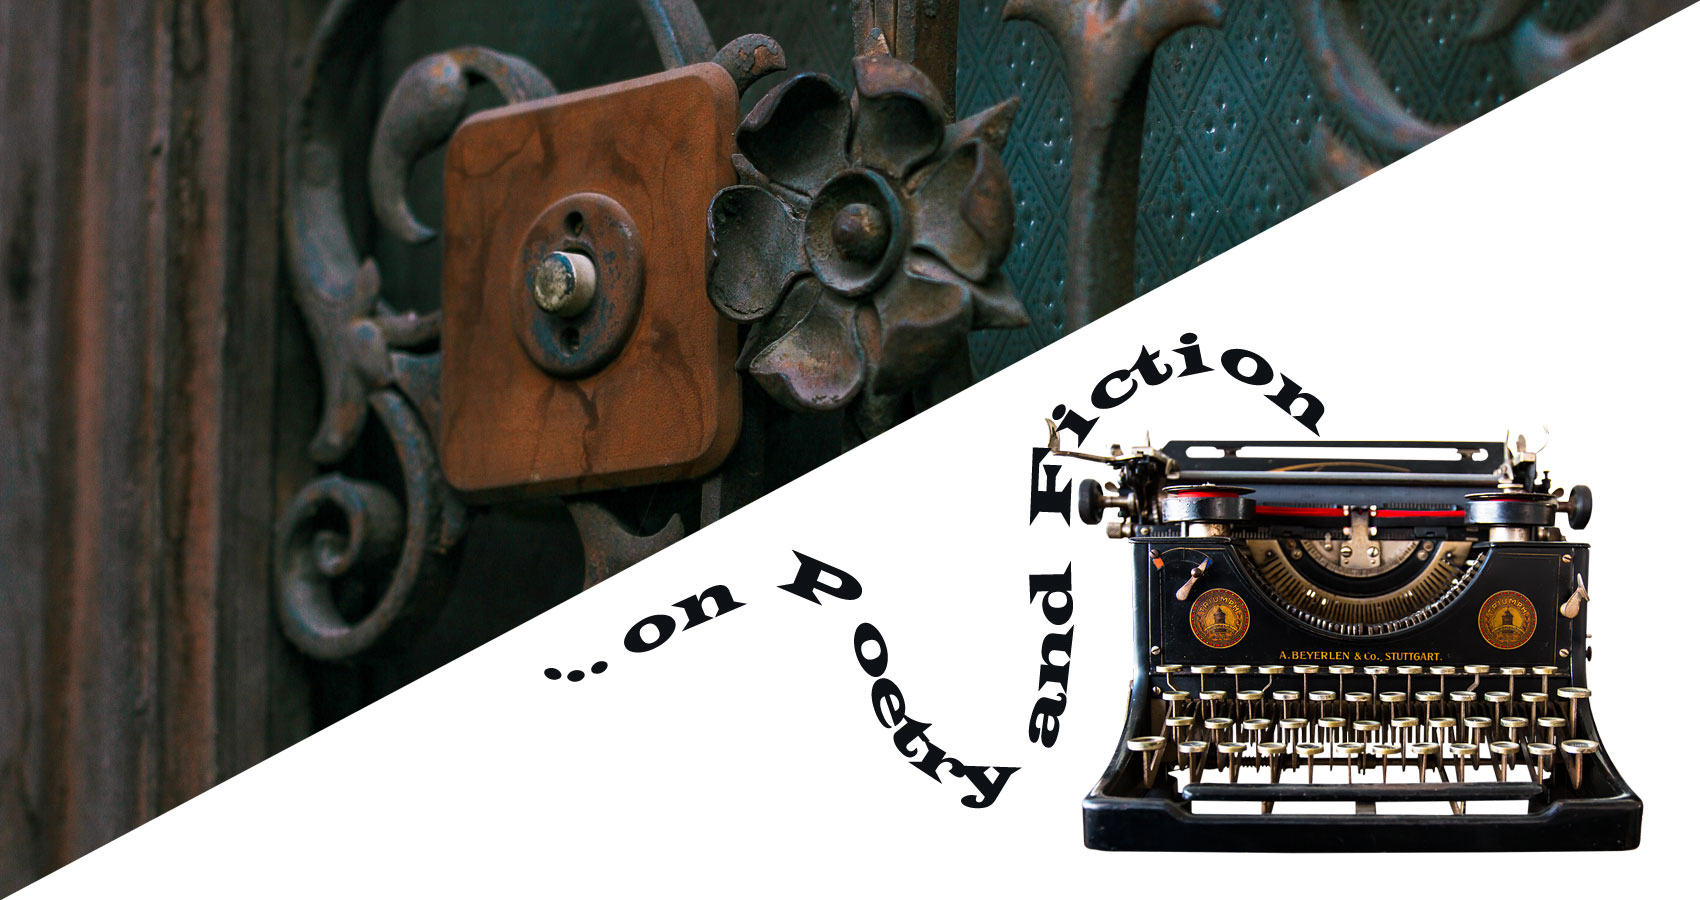 ...on Poetry and Fiction - Just “One Word” Away ("Secrets"), editorial by Phyllis P. Colucci at Spillwords.com